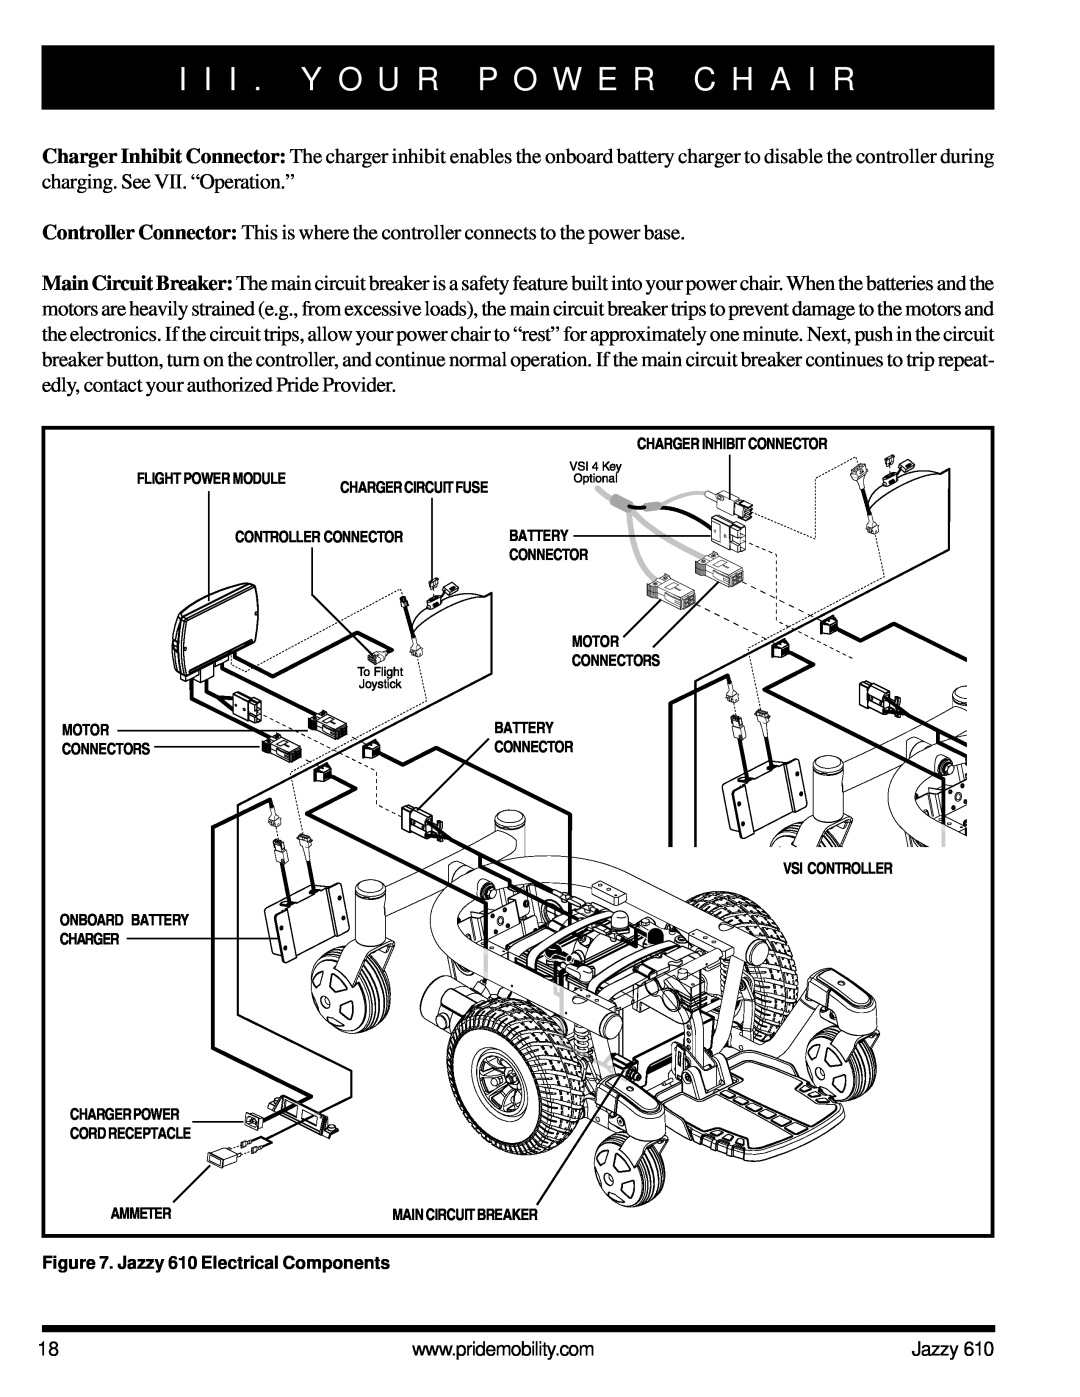 Pride Mobility owner manual I I I . Y O U R P O W E R C H A I R, Jazzy 610 Electrical Components, Charger Circuit Fuse 